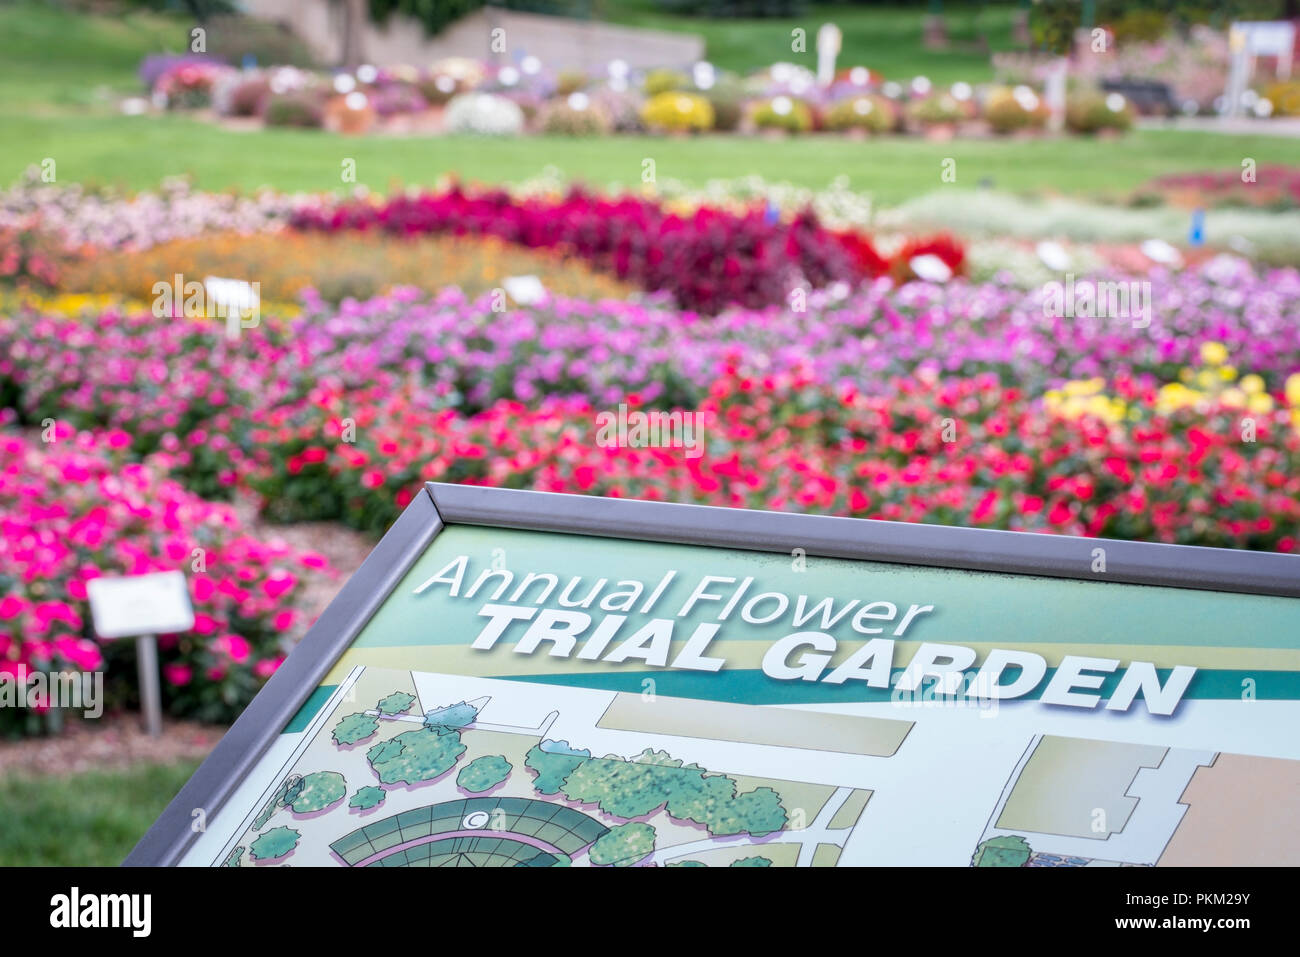 Fort Collins, CO, USA - September 16, 2015: Annual Flower Trial Garden at Colorado State University - information sign with flower bed in background. Stock Photo